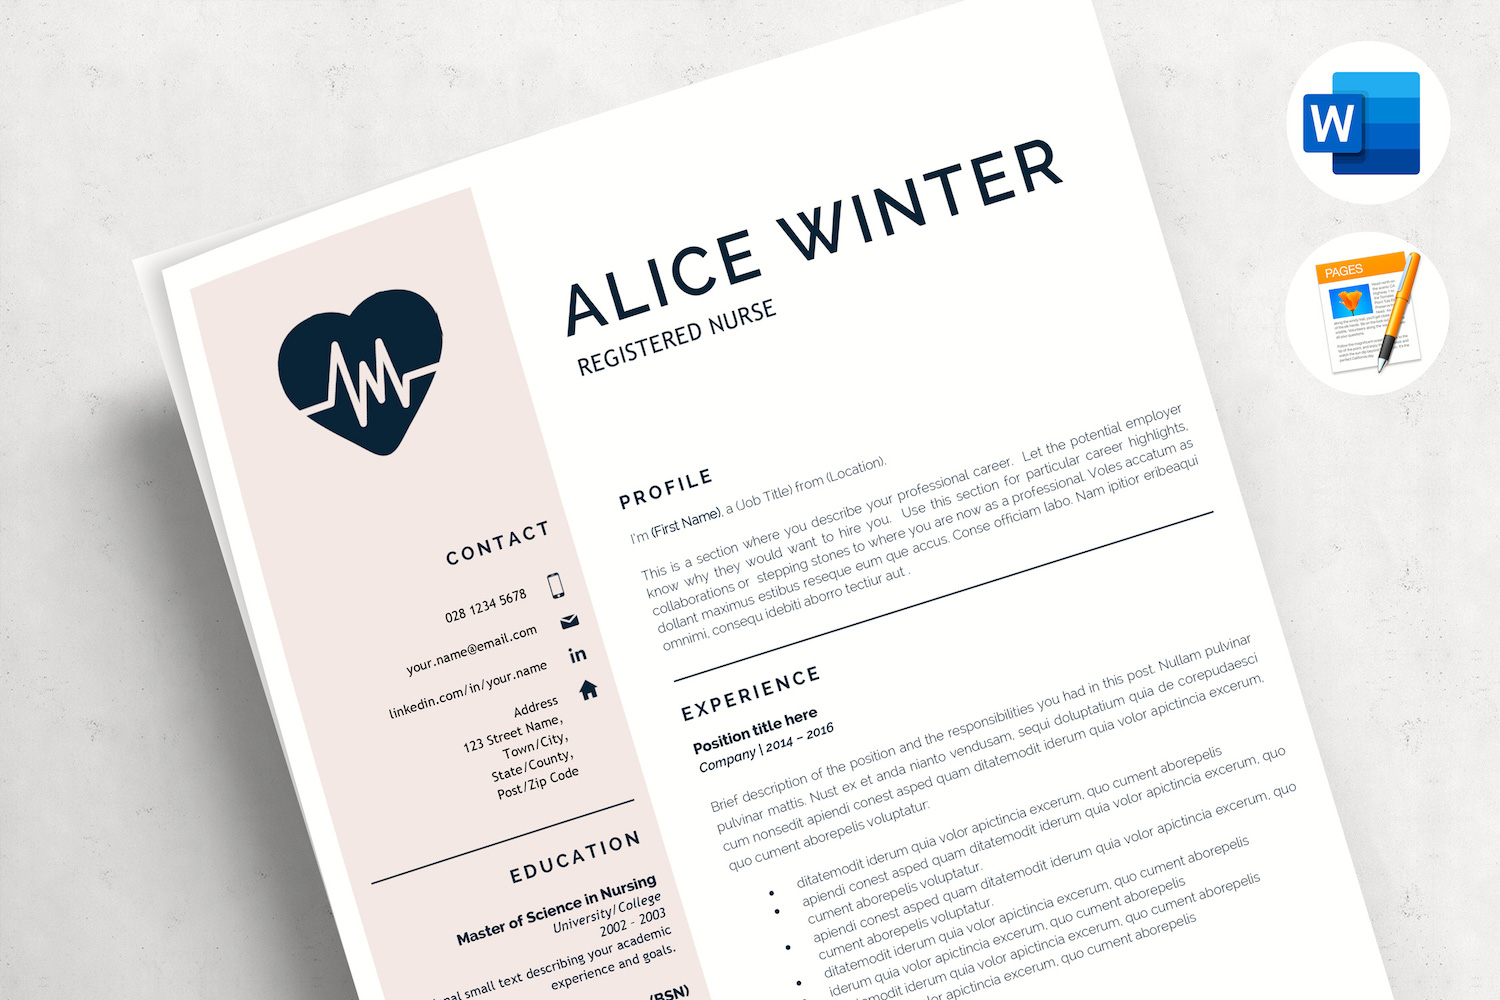 ALICE - RN Nurse Resume Template. Registered Nurse Resume with Cover Letter and References